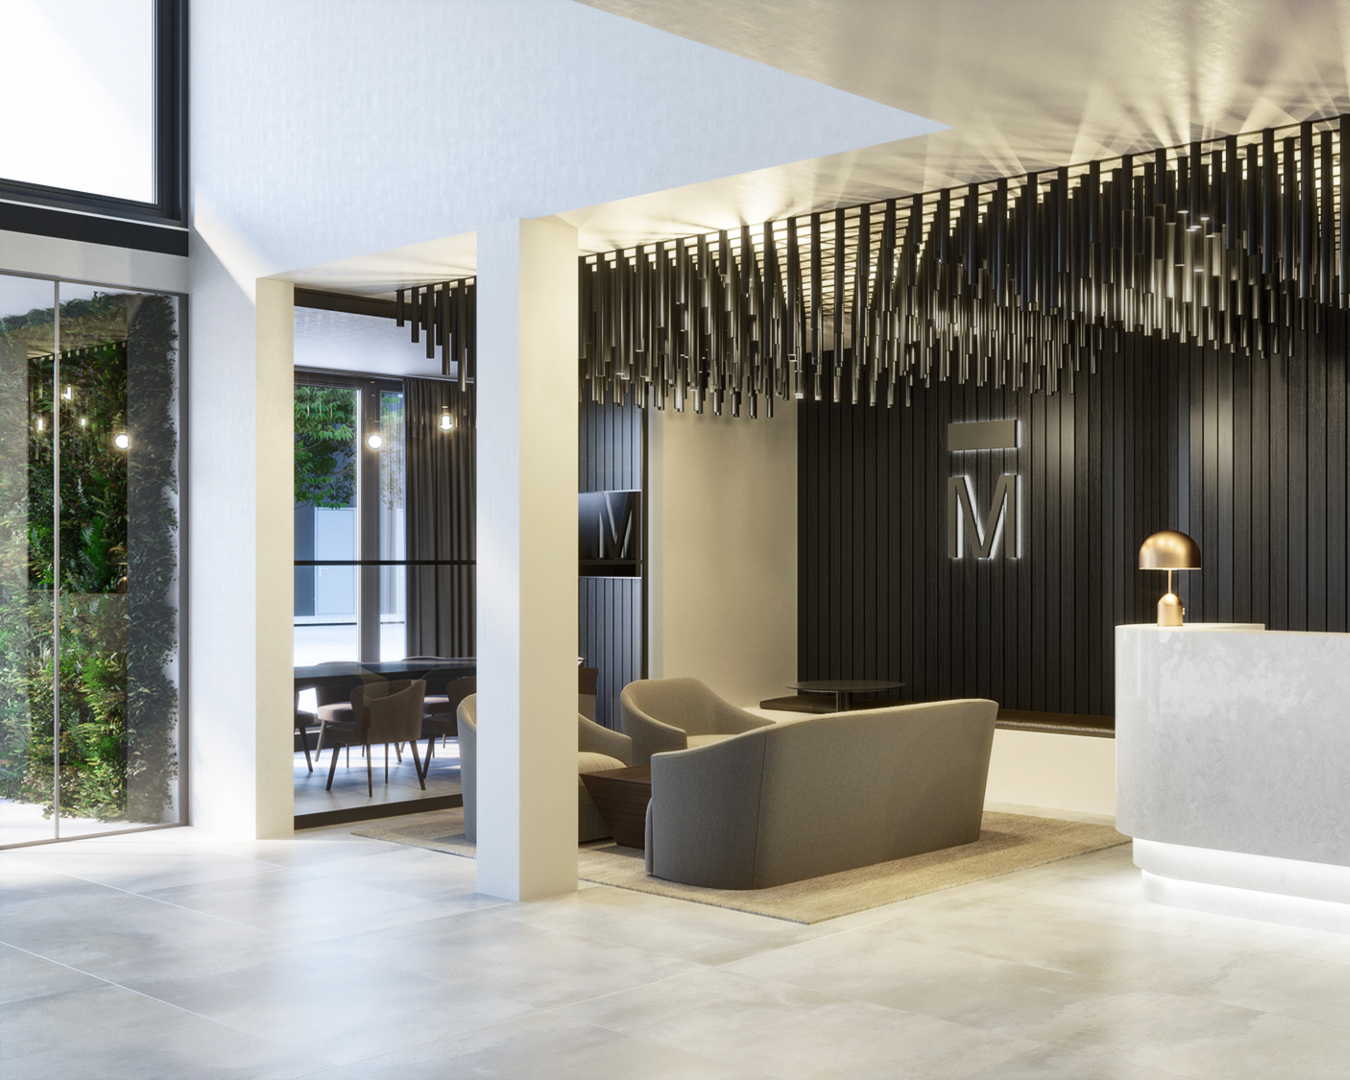 The brand new lobby at The Mayfair is minimalistic yet luxurious, featuring sparkling lights and an entryway lined with greenery 